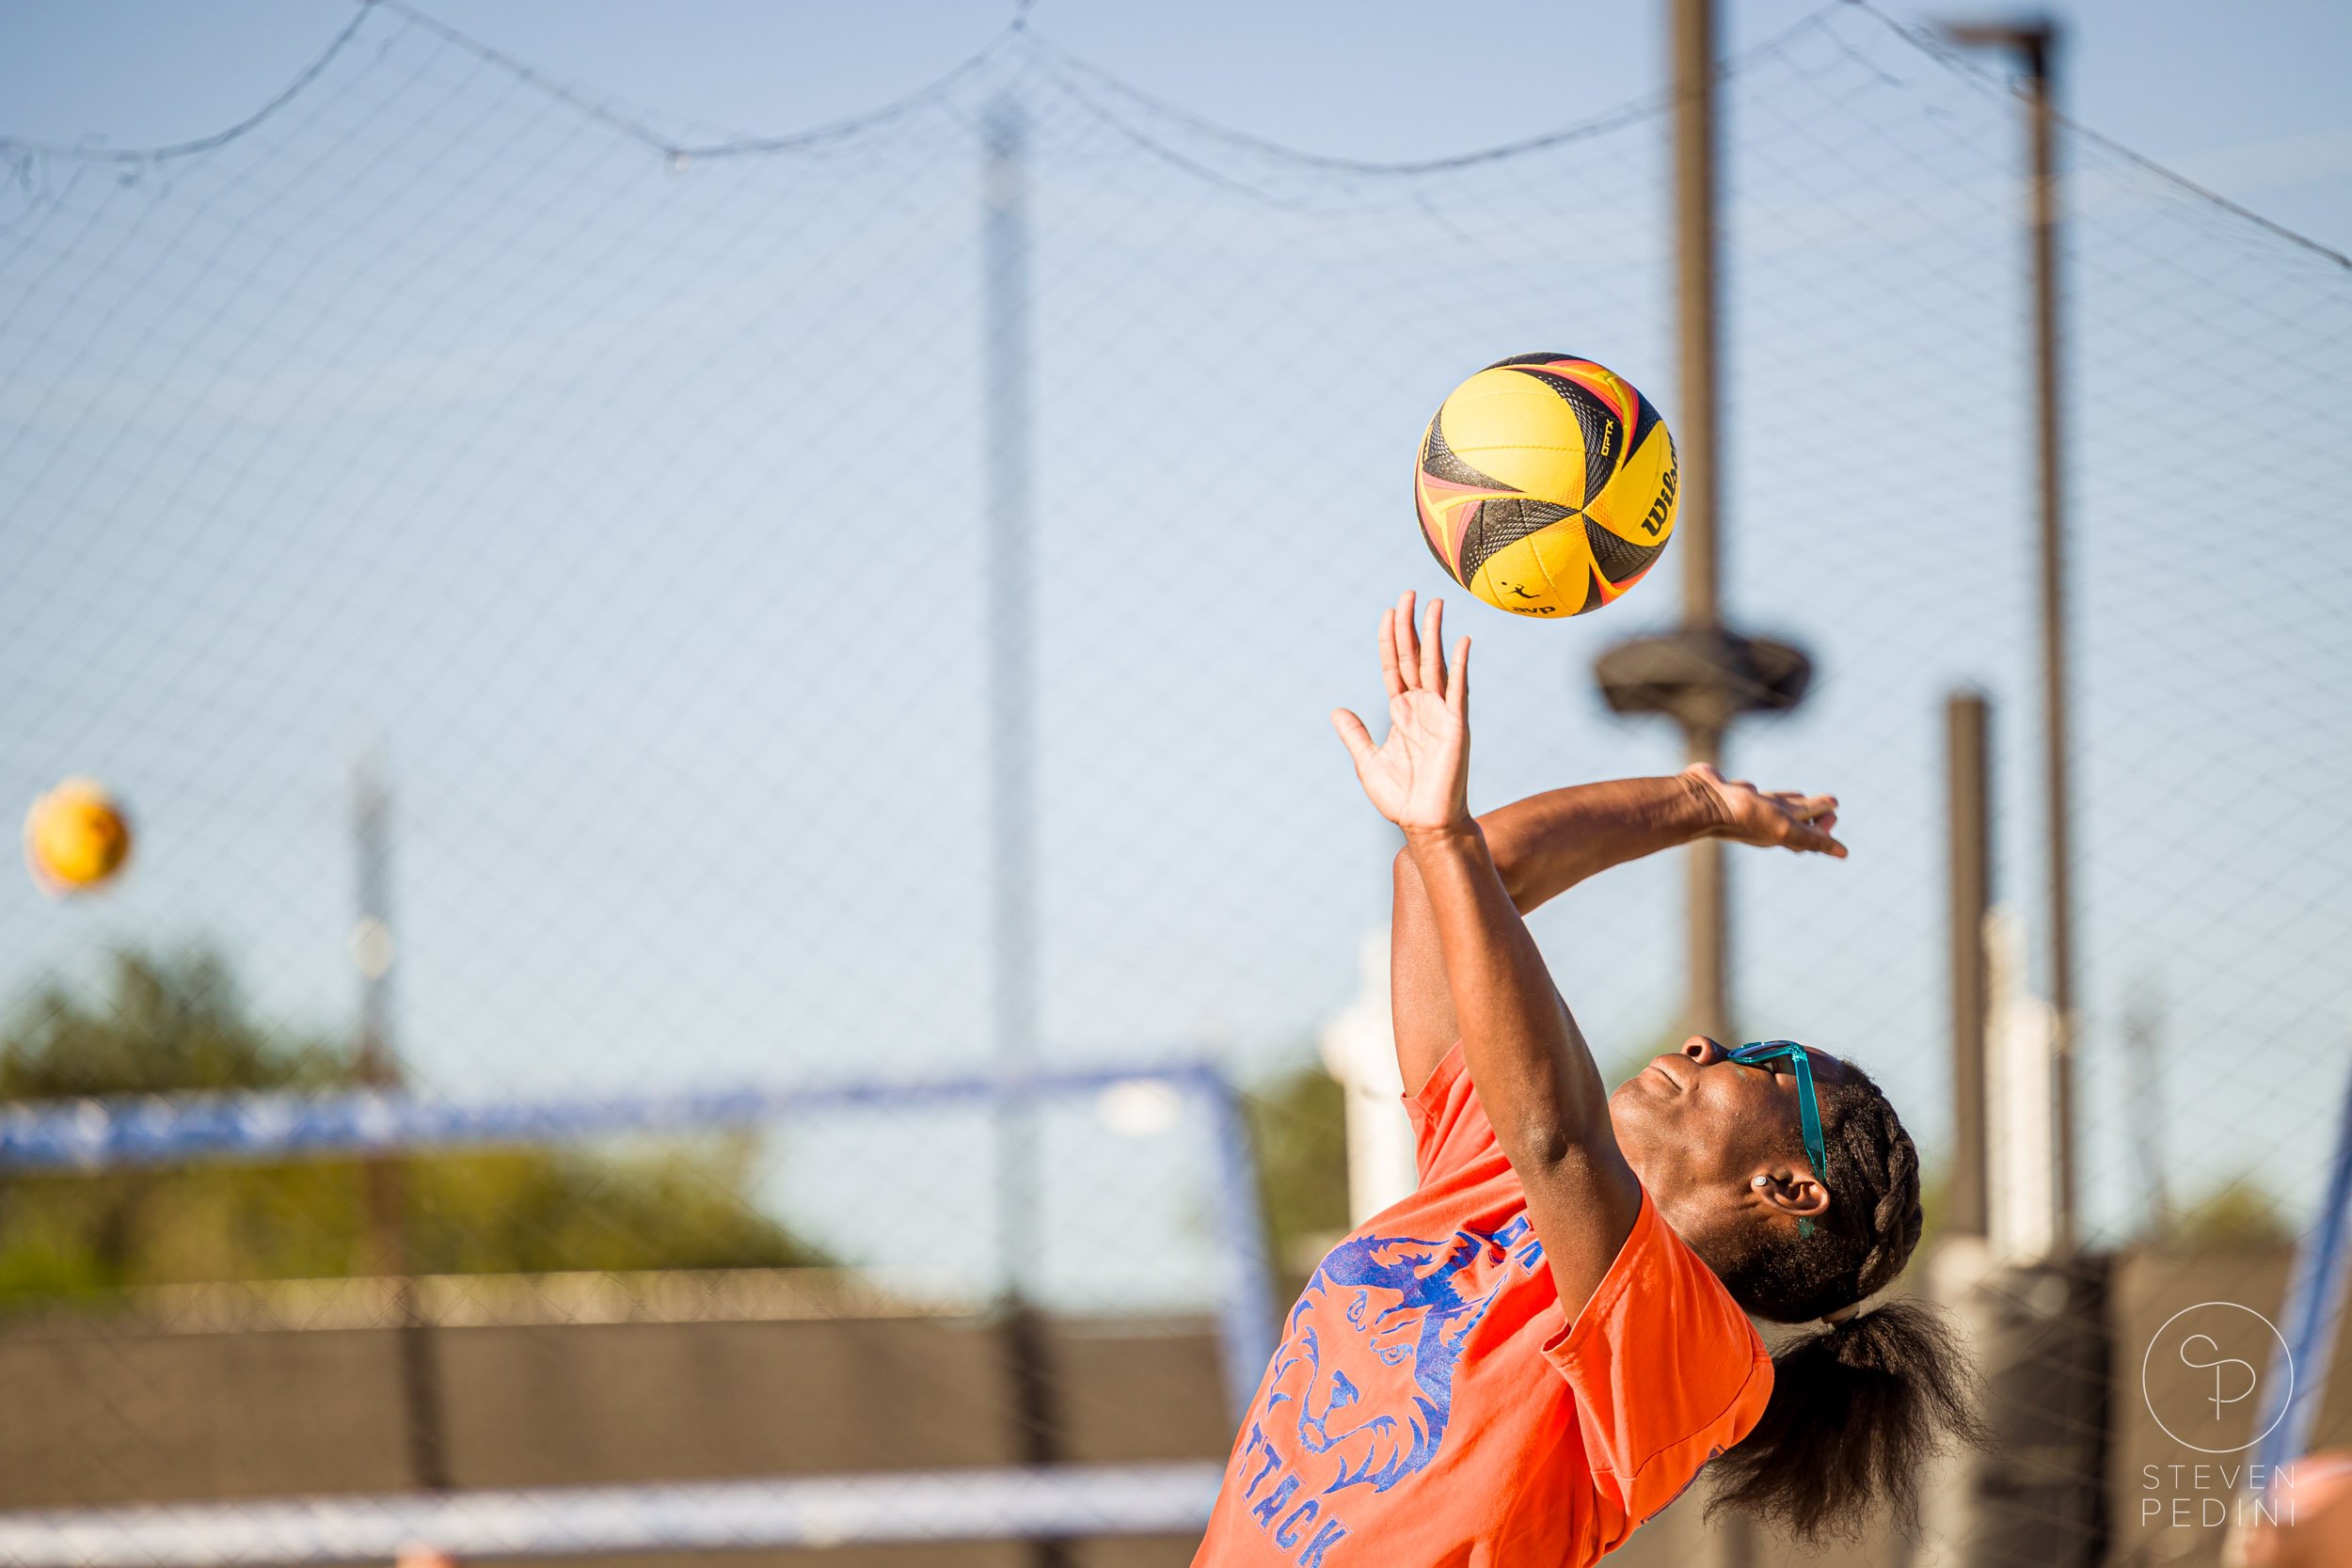 Steven Pedini Photography - Bumpy Pickle - Sand Volleyball - Houston TX - World Cup of Volleyball - 00066.jpg